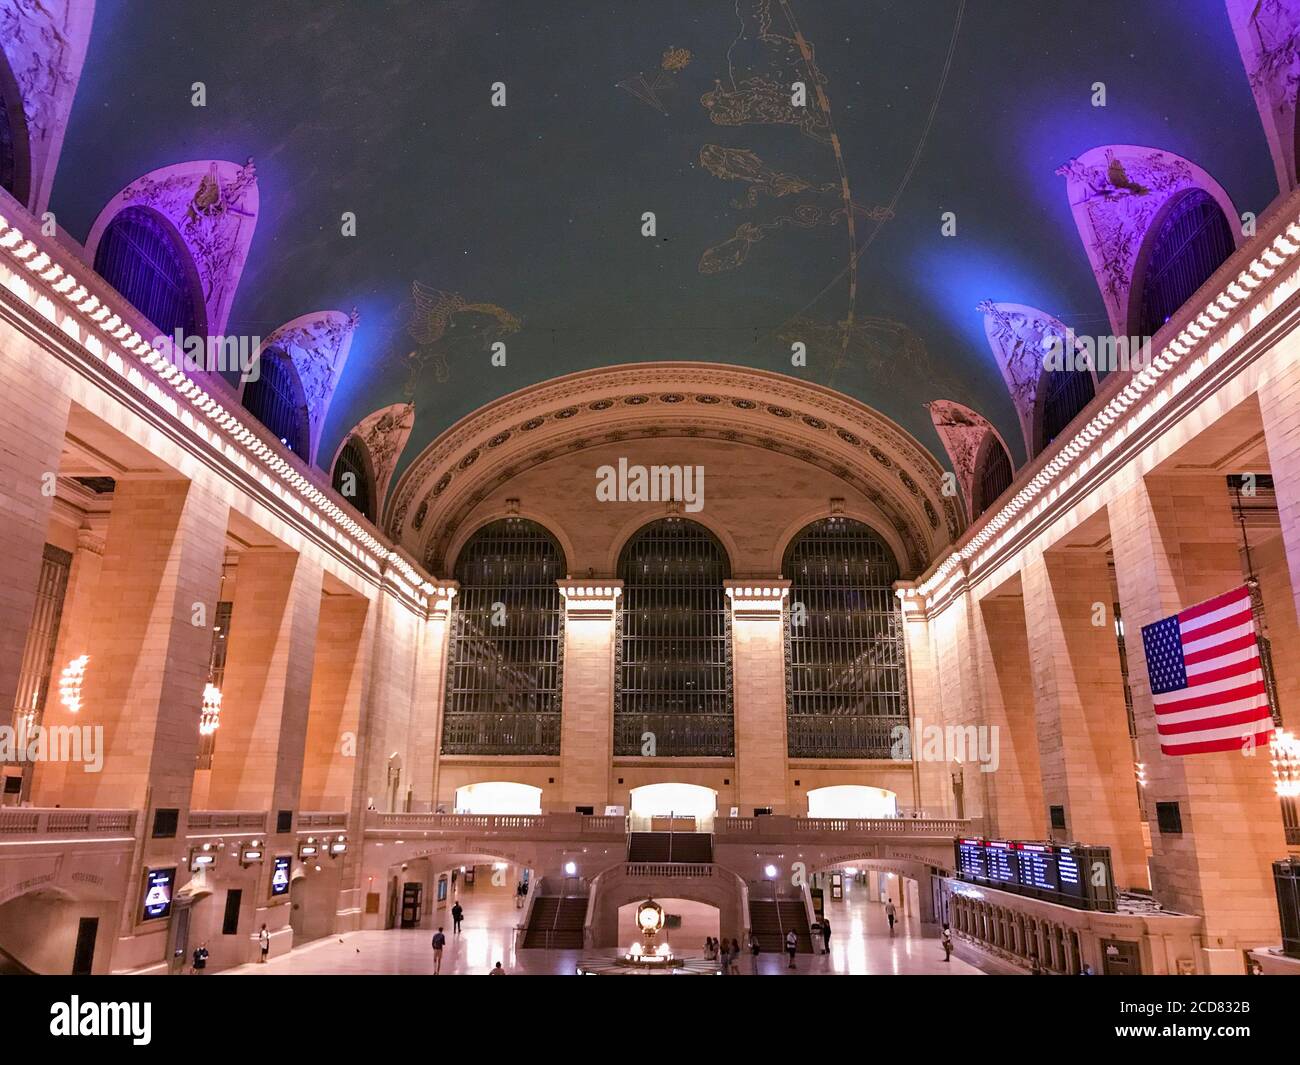 The Grand Central in New York City was lit up purple in honor of the suffrage centennial on Women’s Equality Day (August 26, 2020). Stock Photo